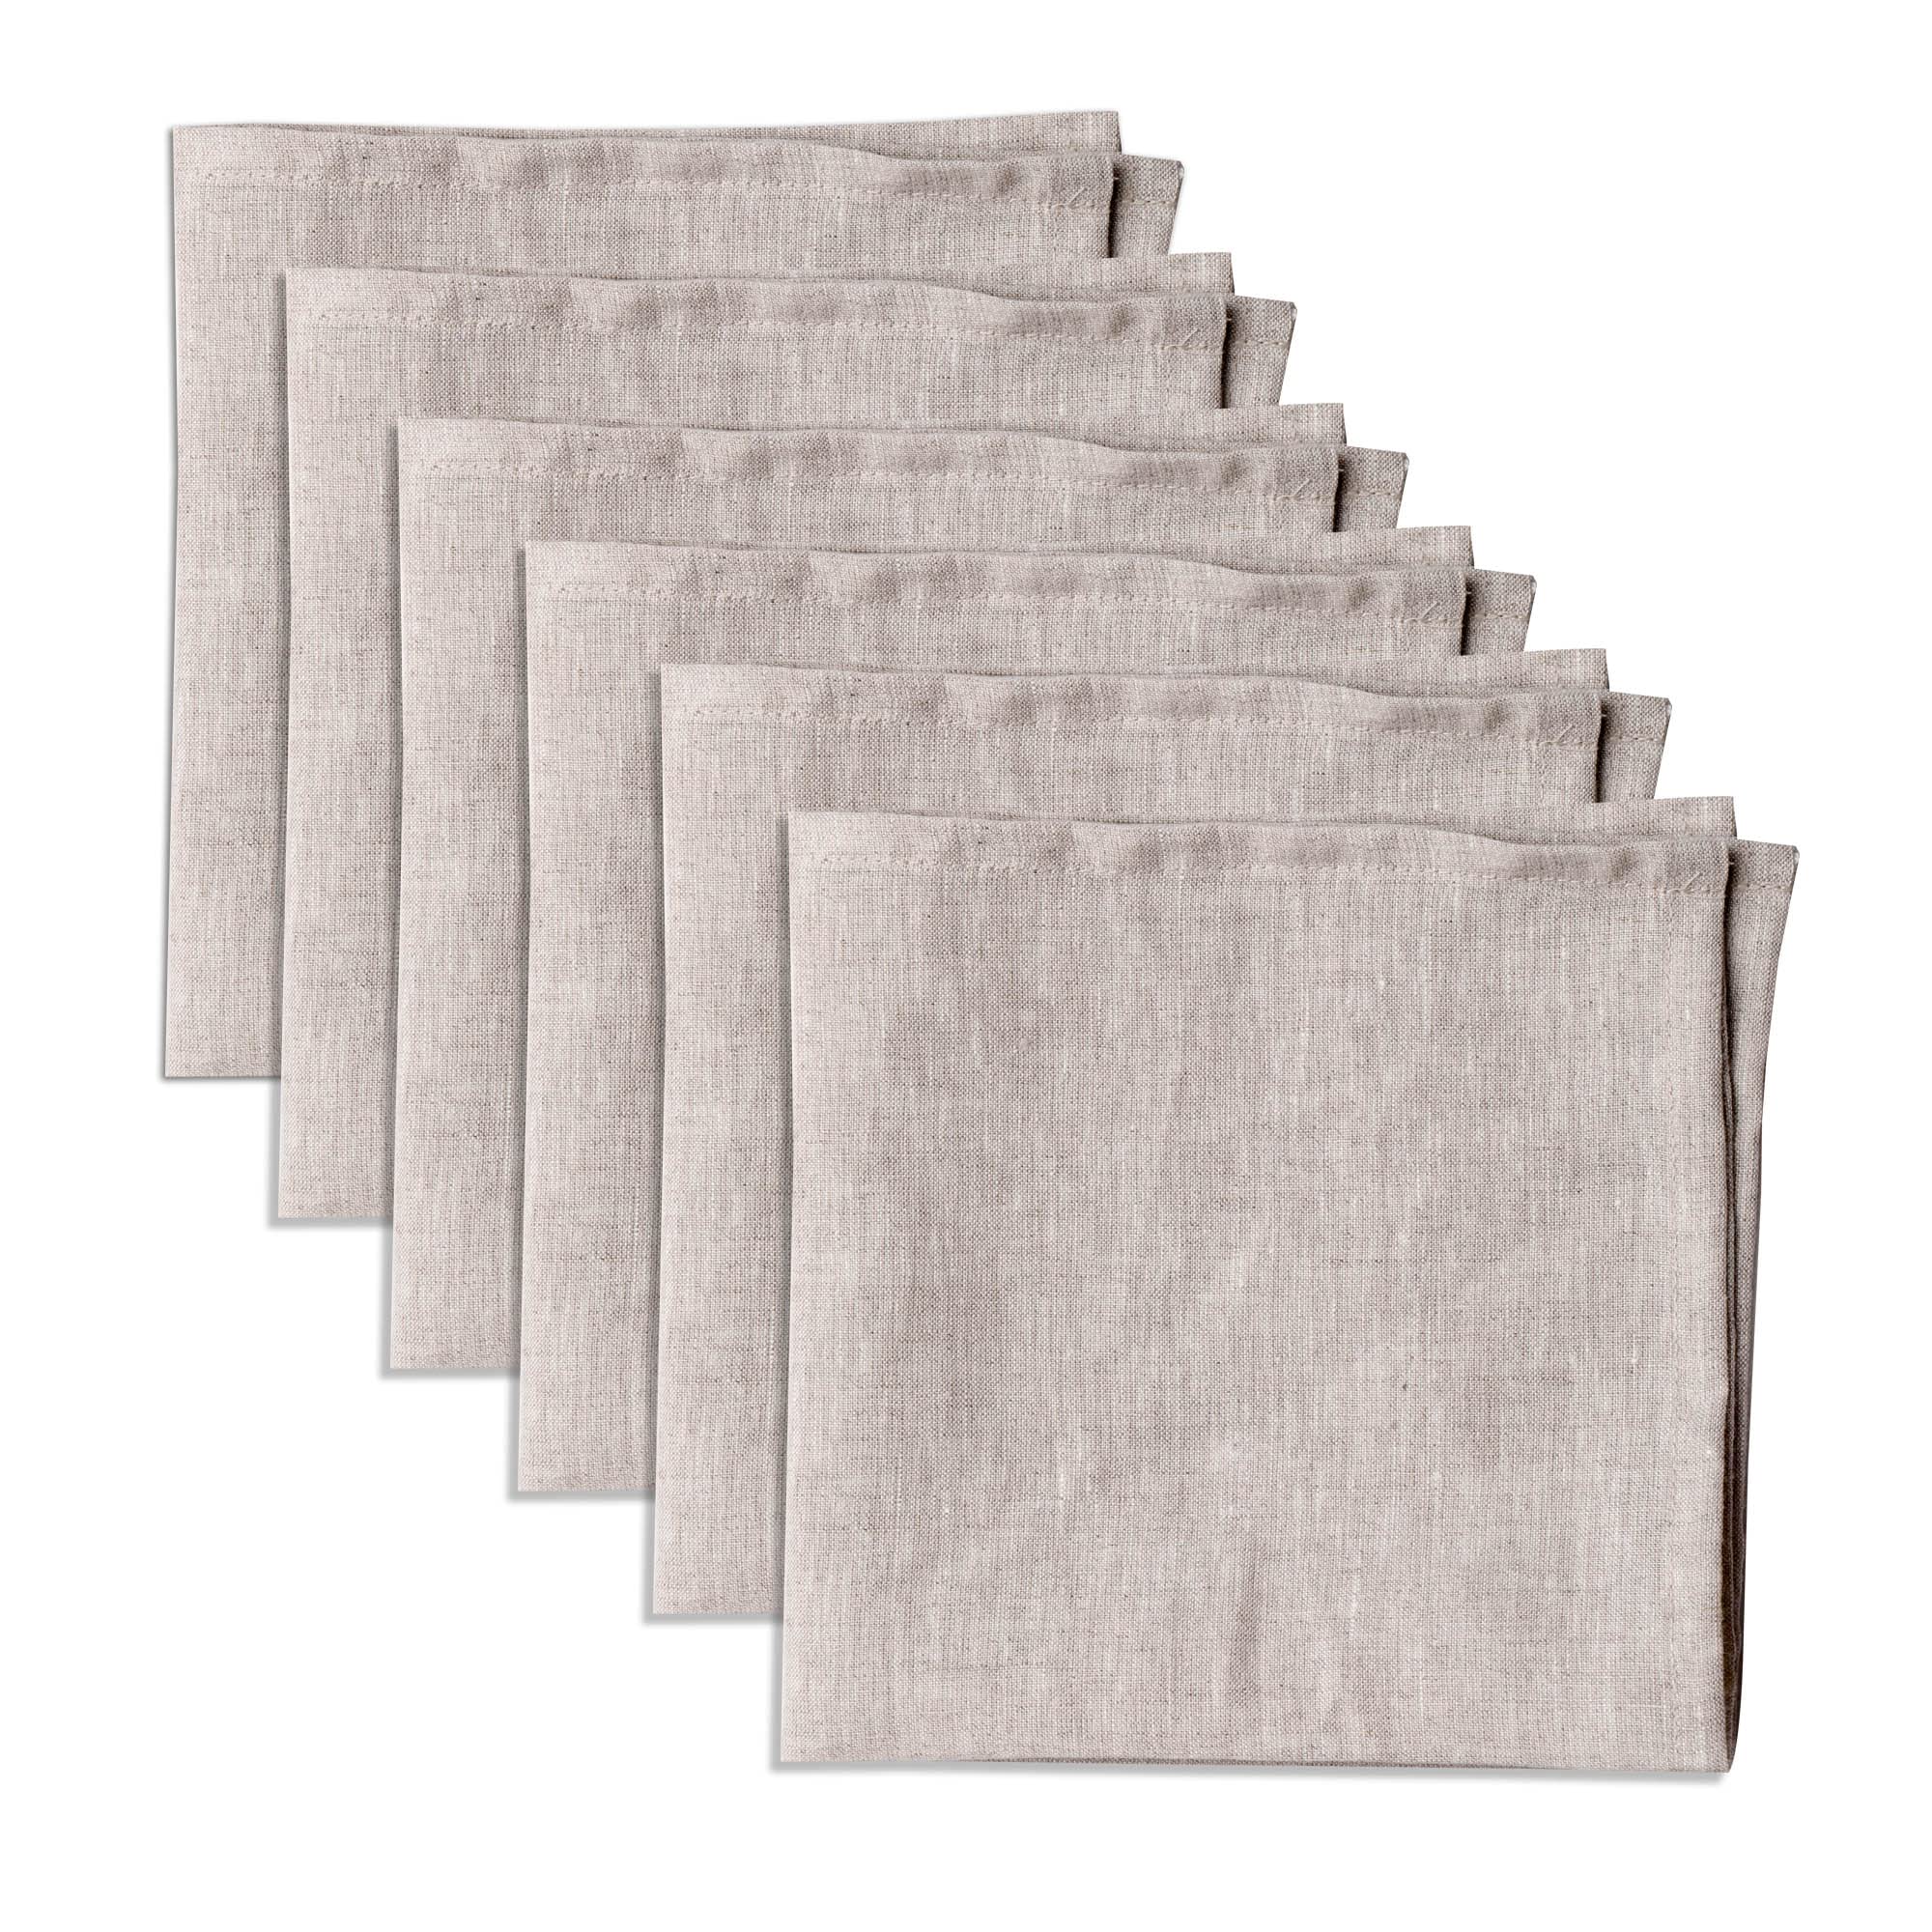 Linendo 100% Pure Linen Dinner Cloth Napkins 38 x 38 cm Natural - Set of 6 Pack European Flax Natural Fabric Washable for Home and Kitchen